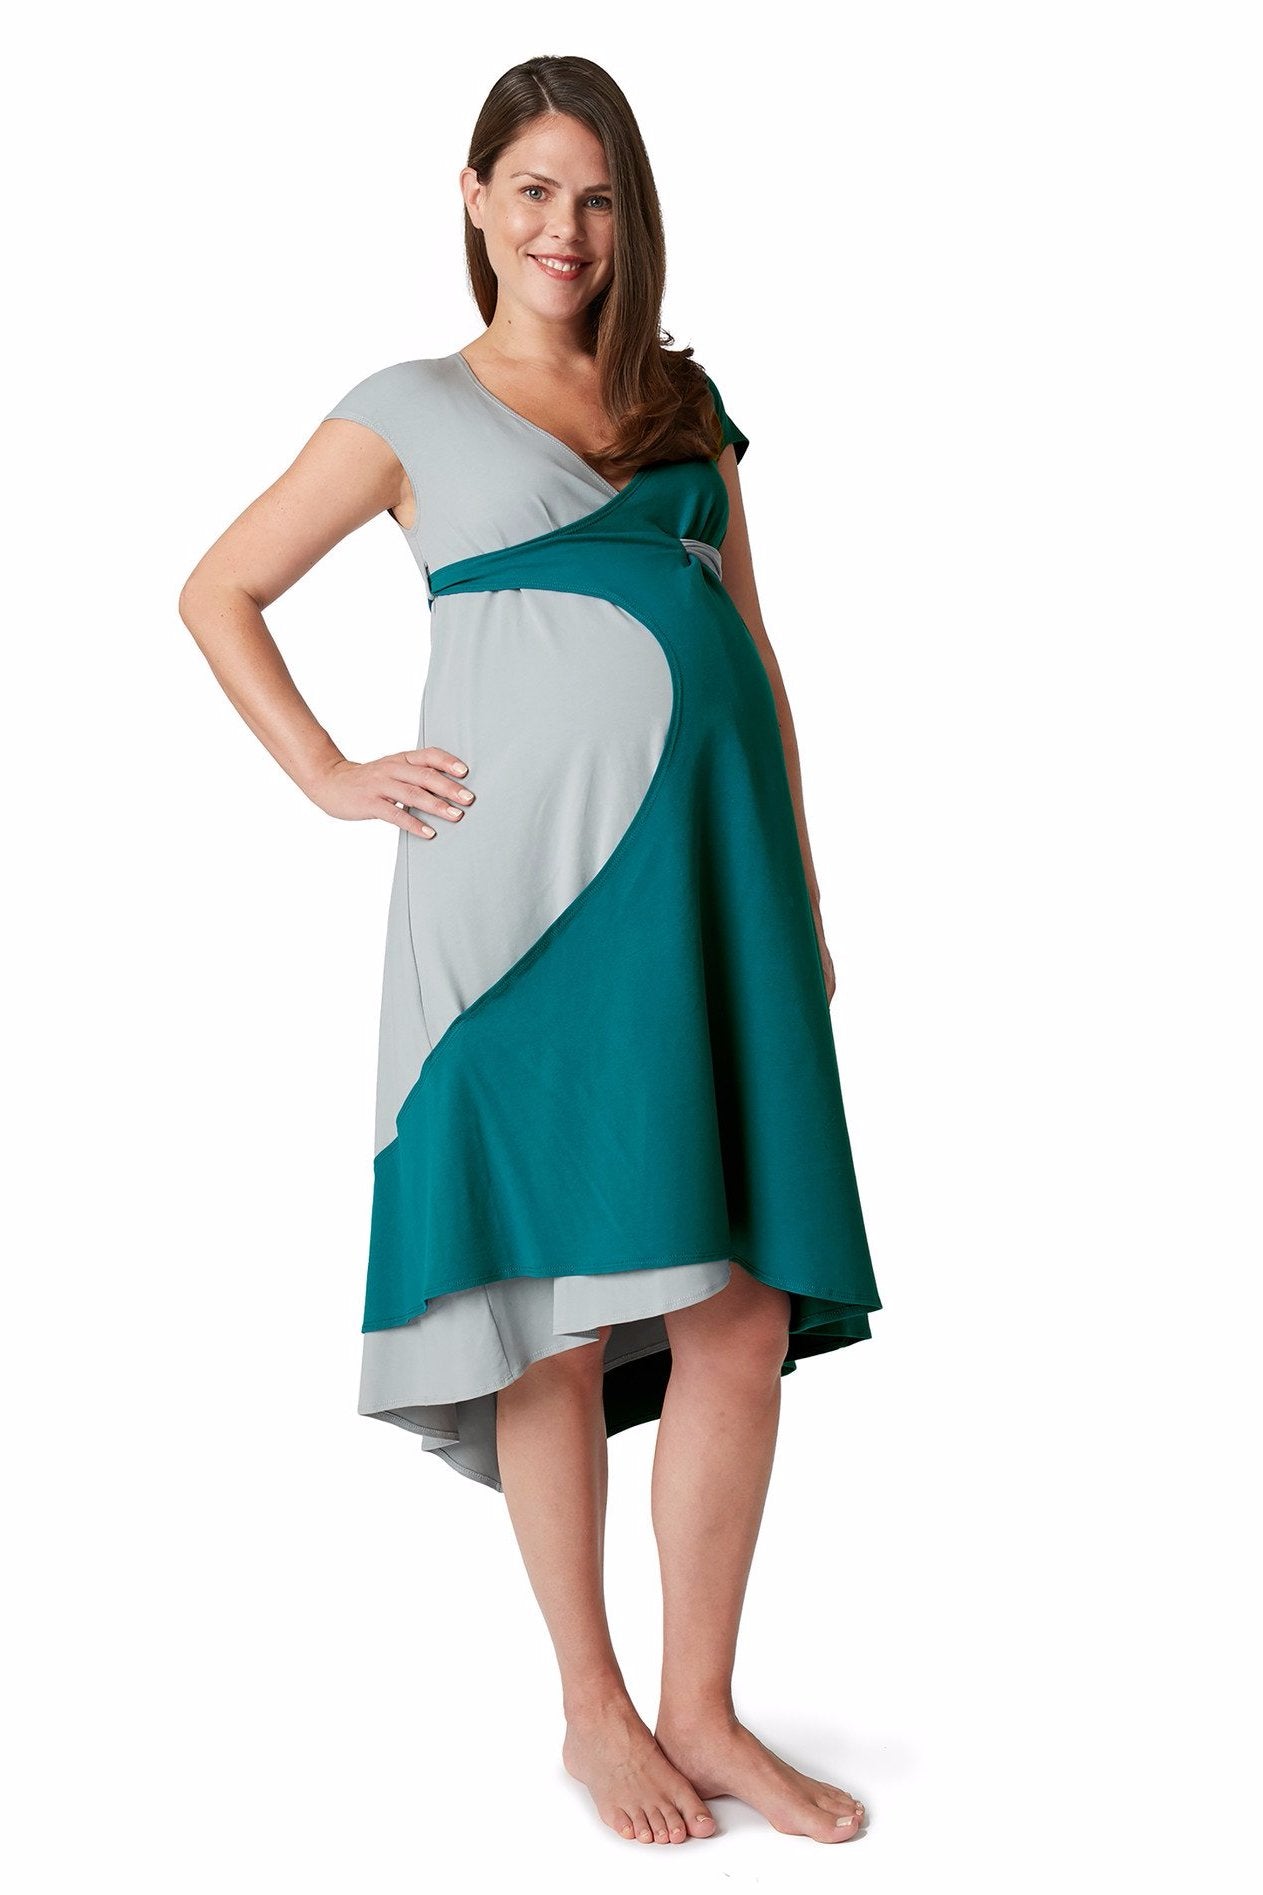 3-in-1 birthing gown wear for labor and deliver, as a maternity dress and a  postpartum/nursing dress. Visit our … | Diy maternity gown, Birthing gown,  Nursing dress